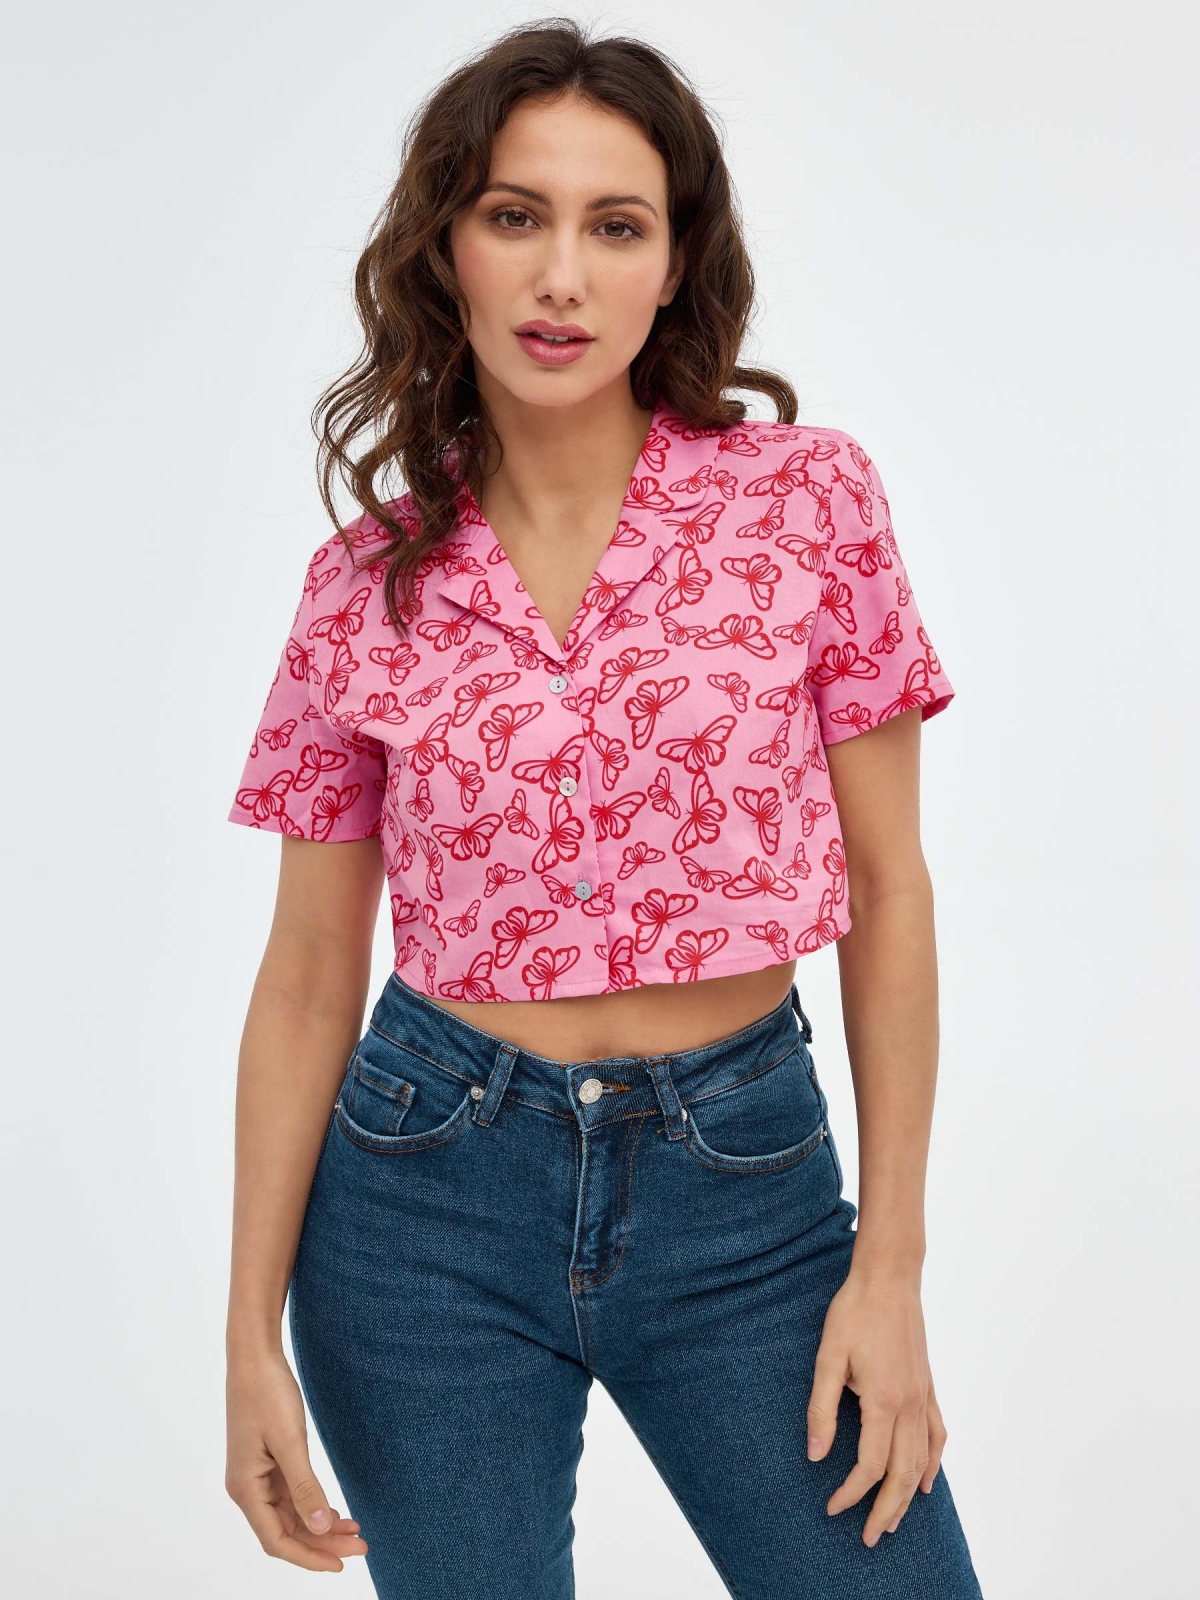 Printed crop shirt bubblegum pink middle front view